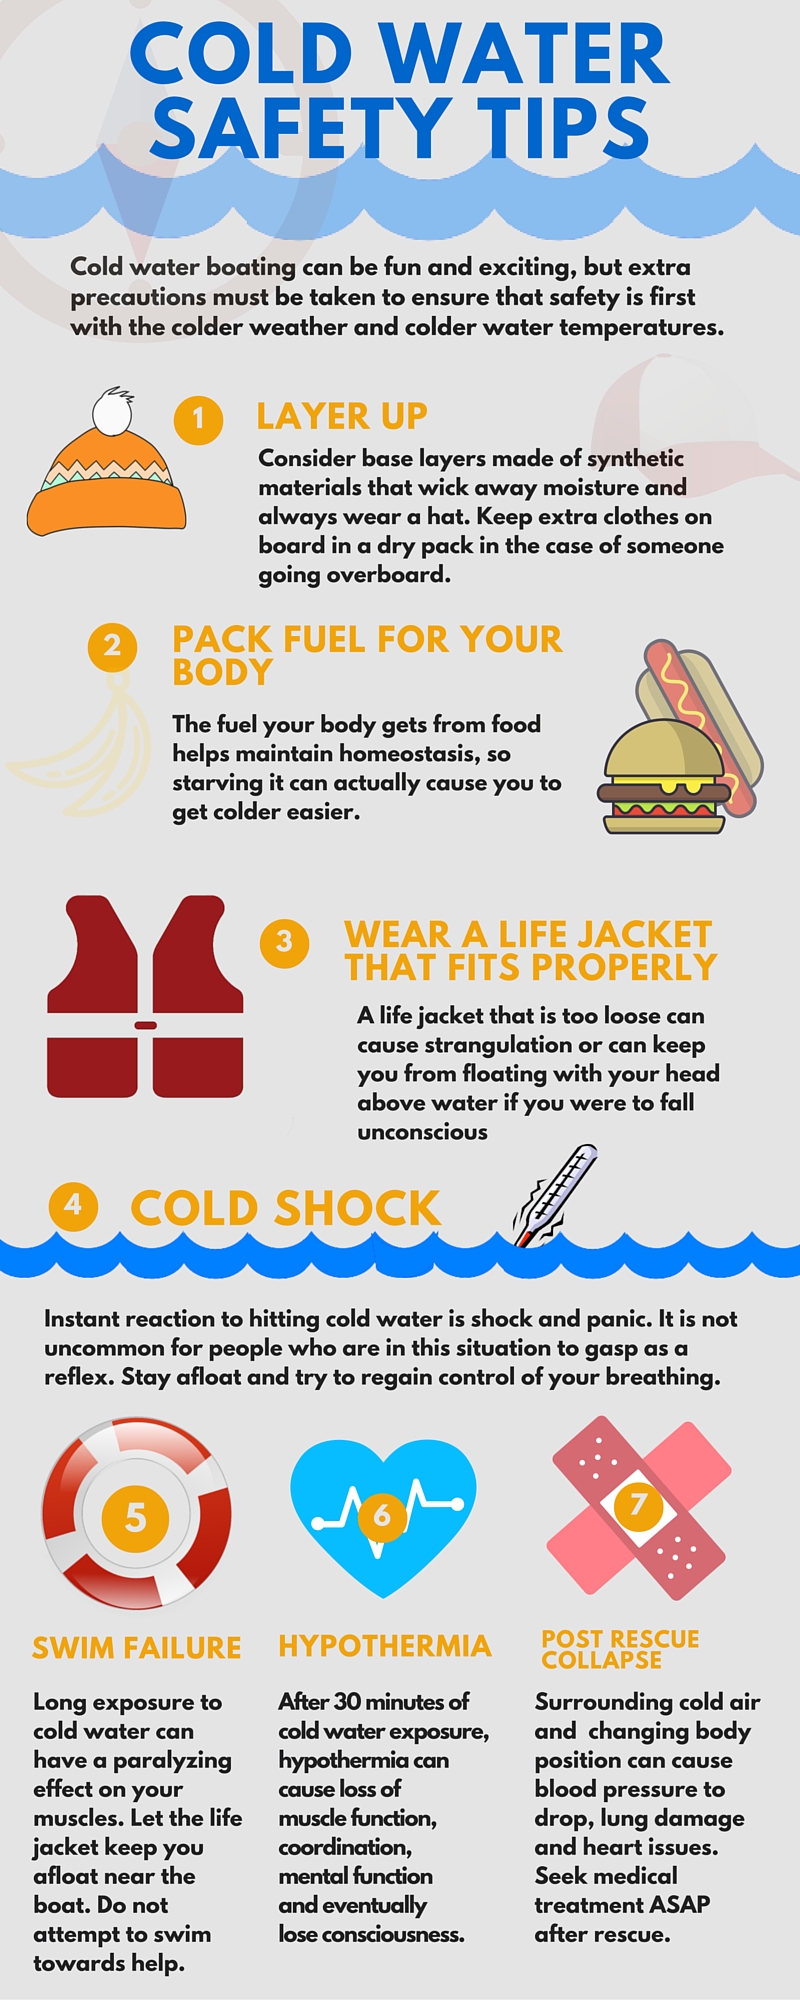 cold water boating safety tips infographic